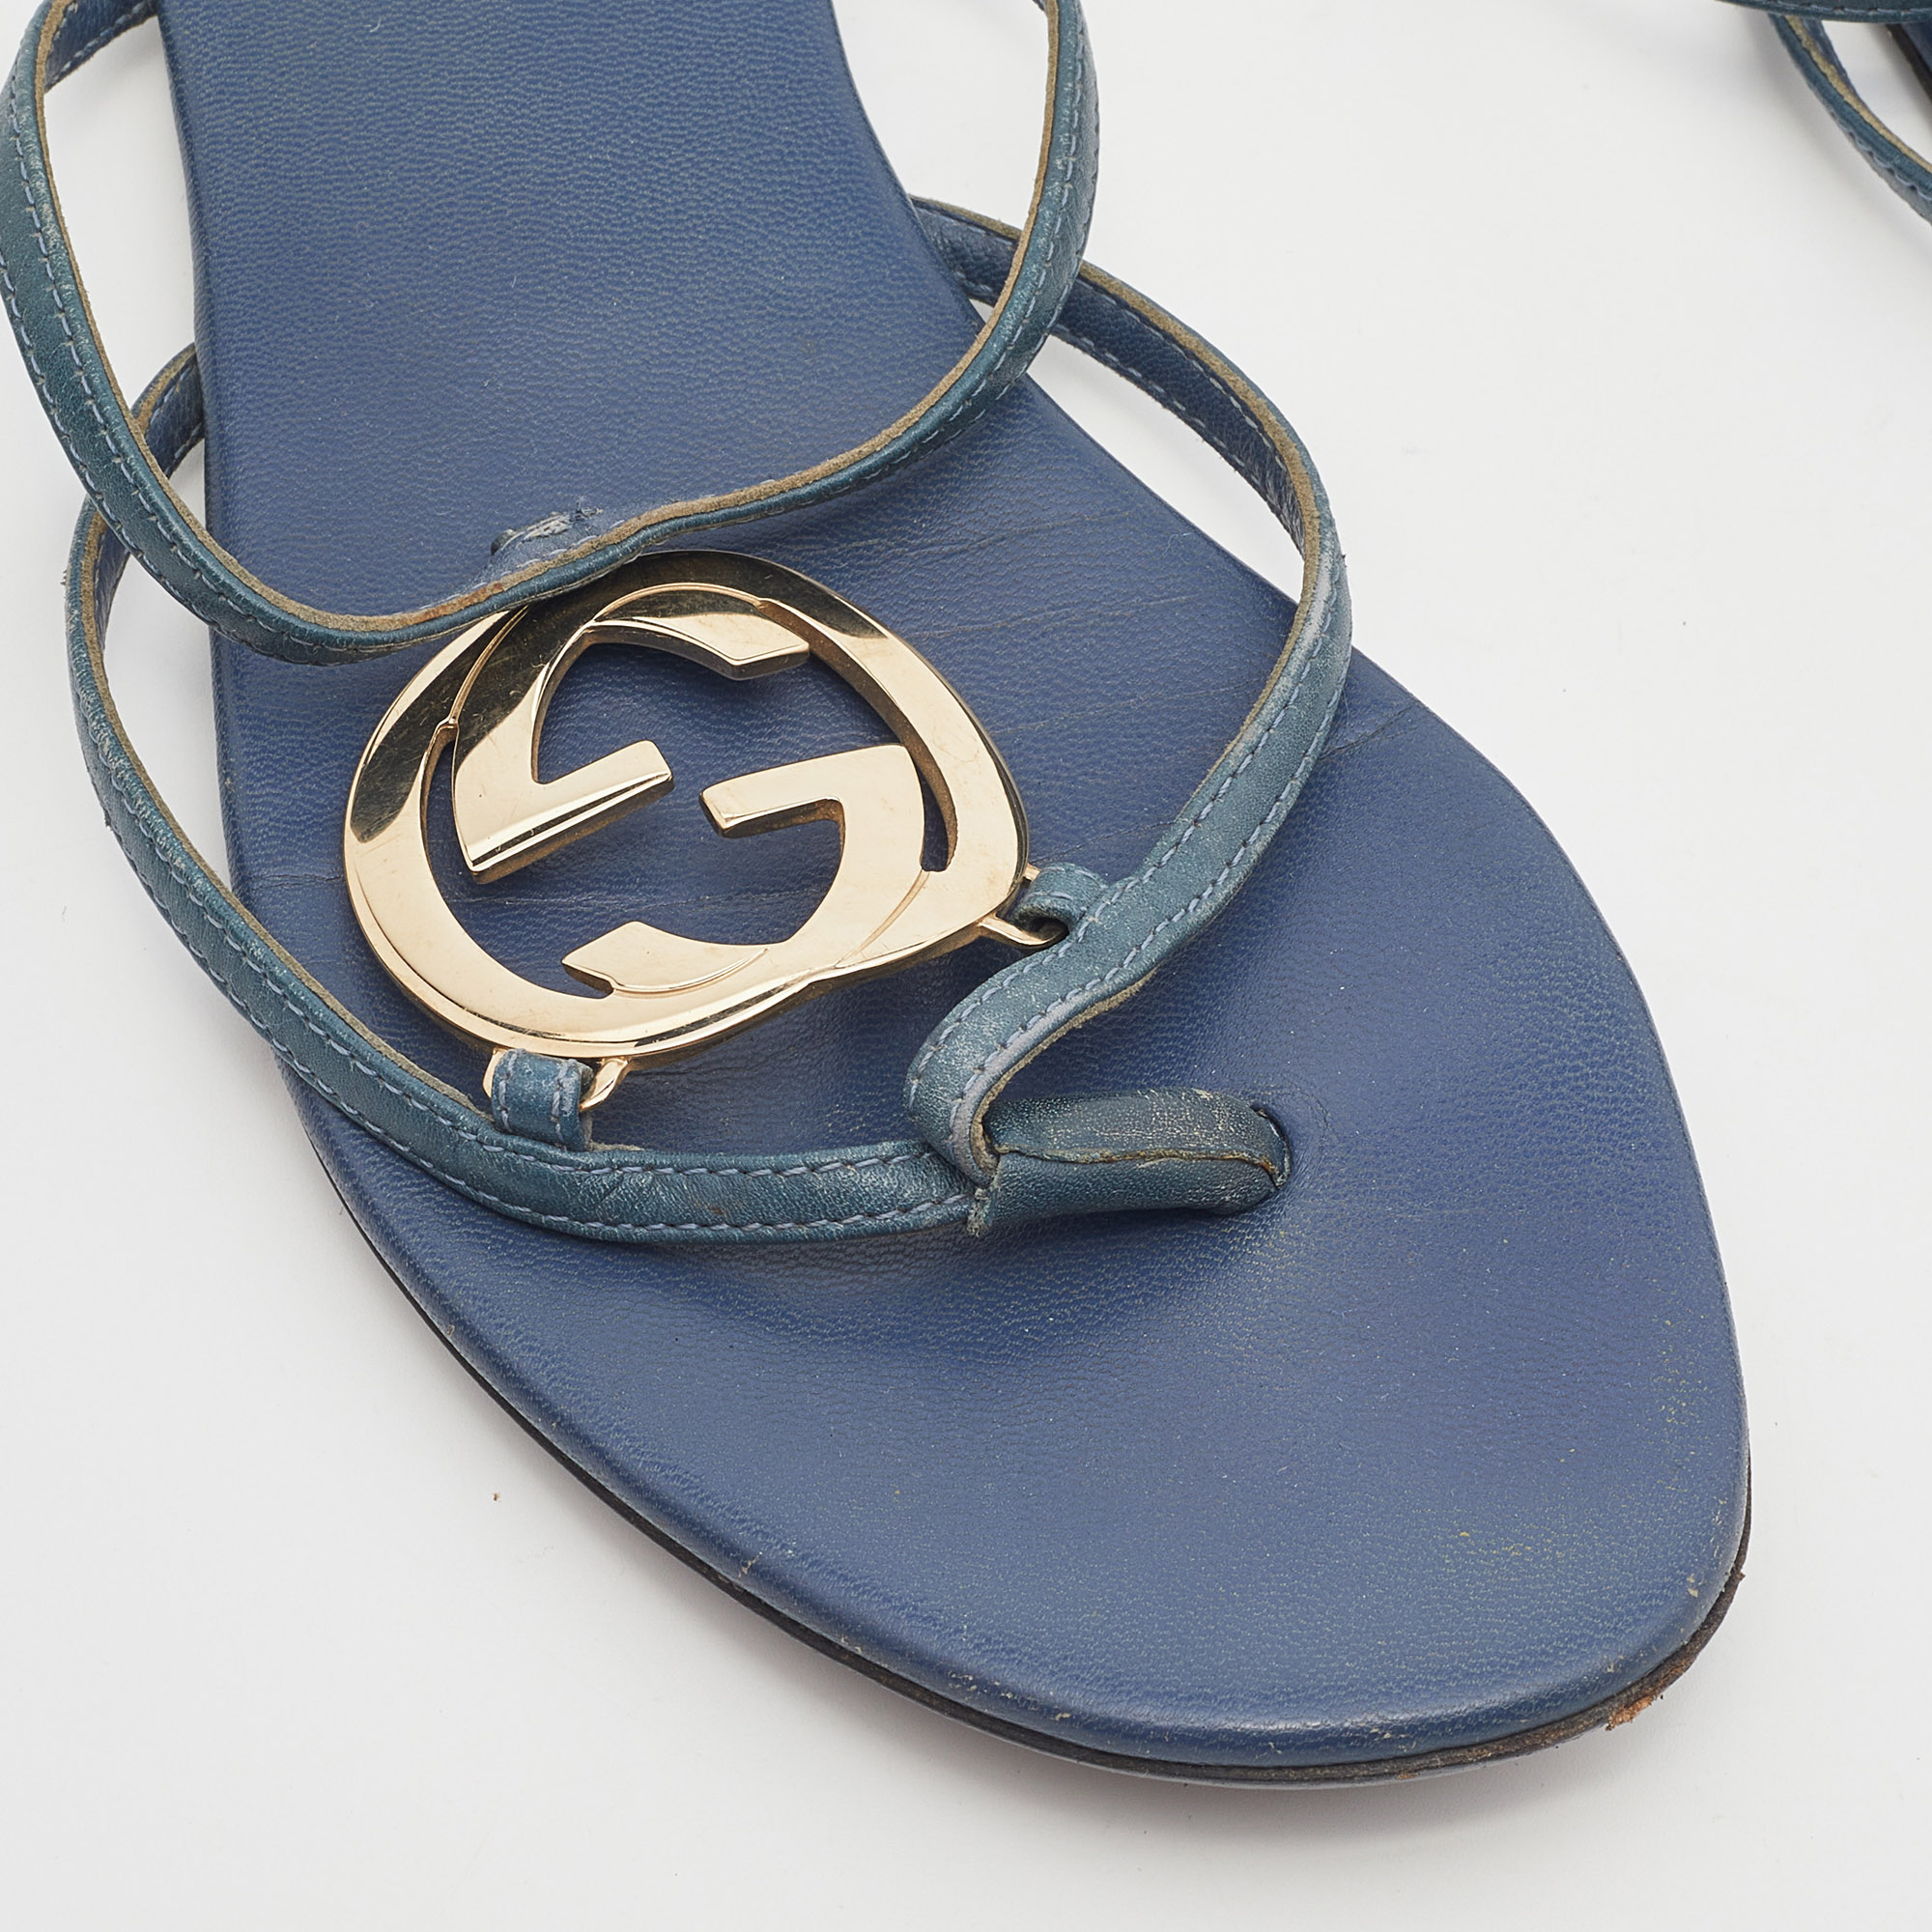 Gucci Blue Leather GG Cage Flat Thong Sandals Size 37